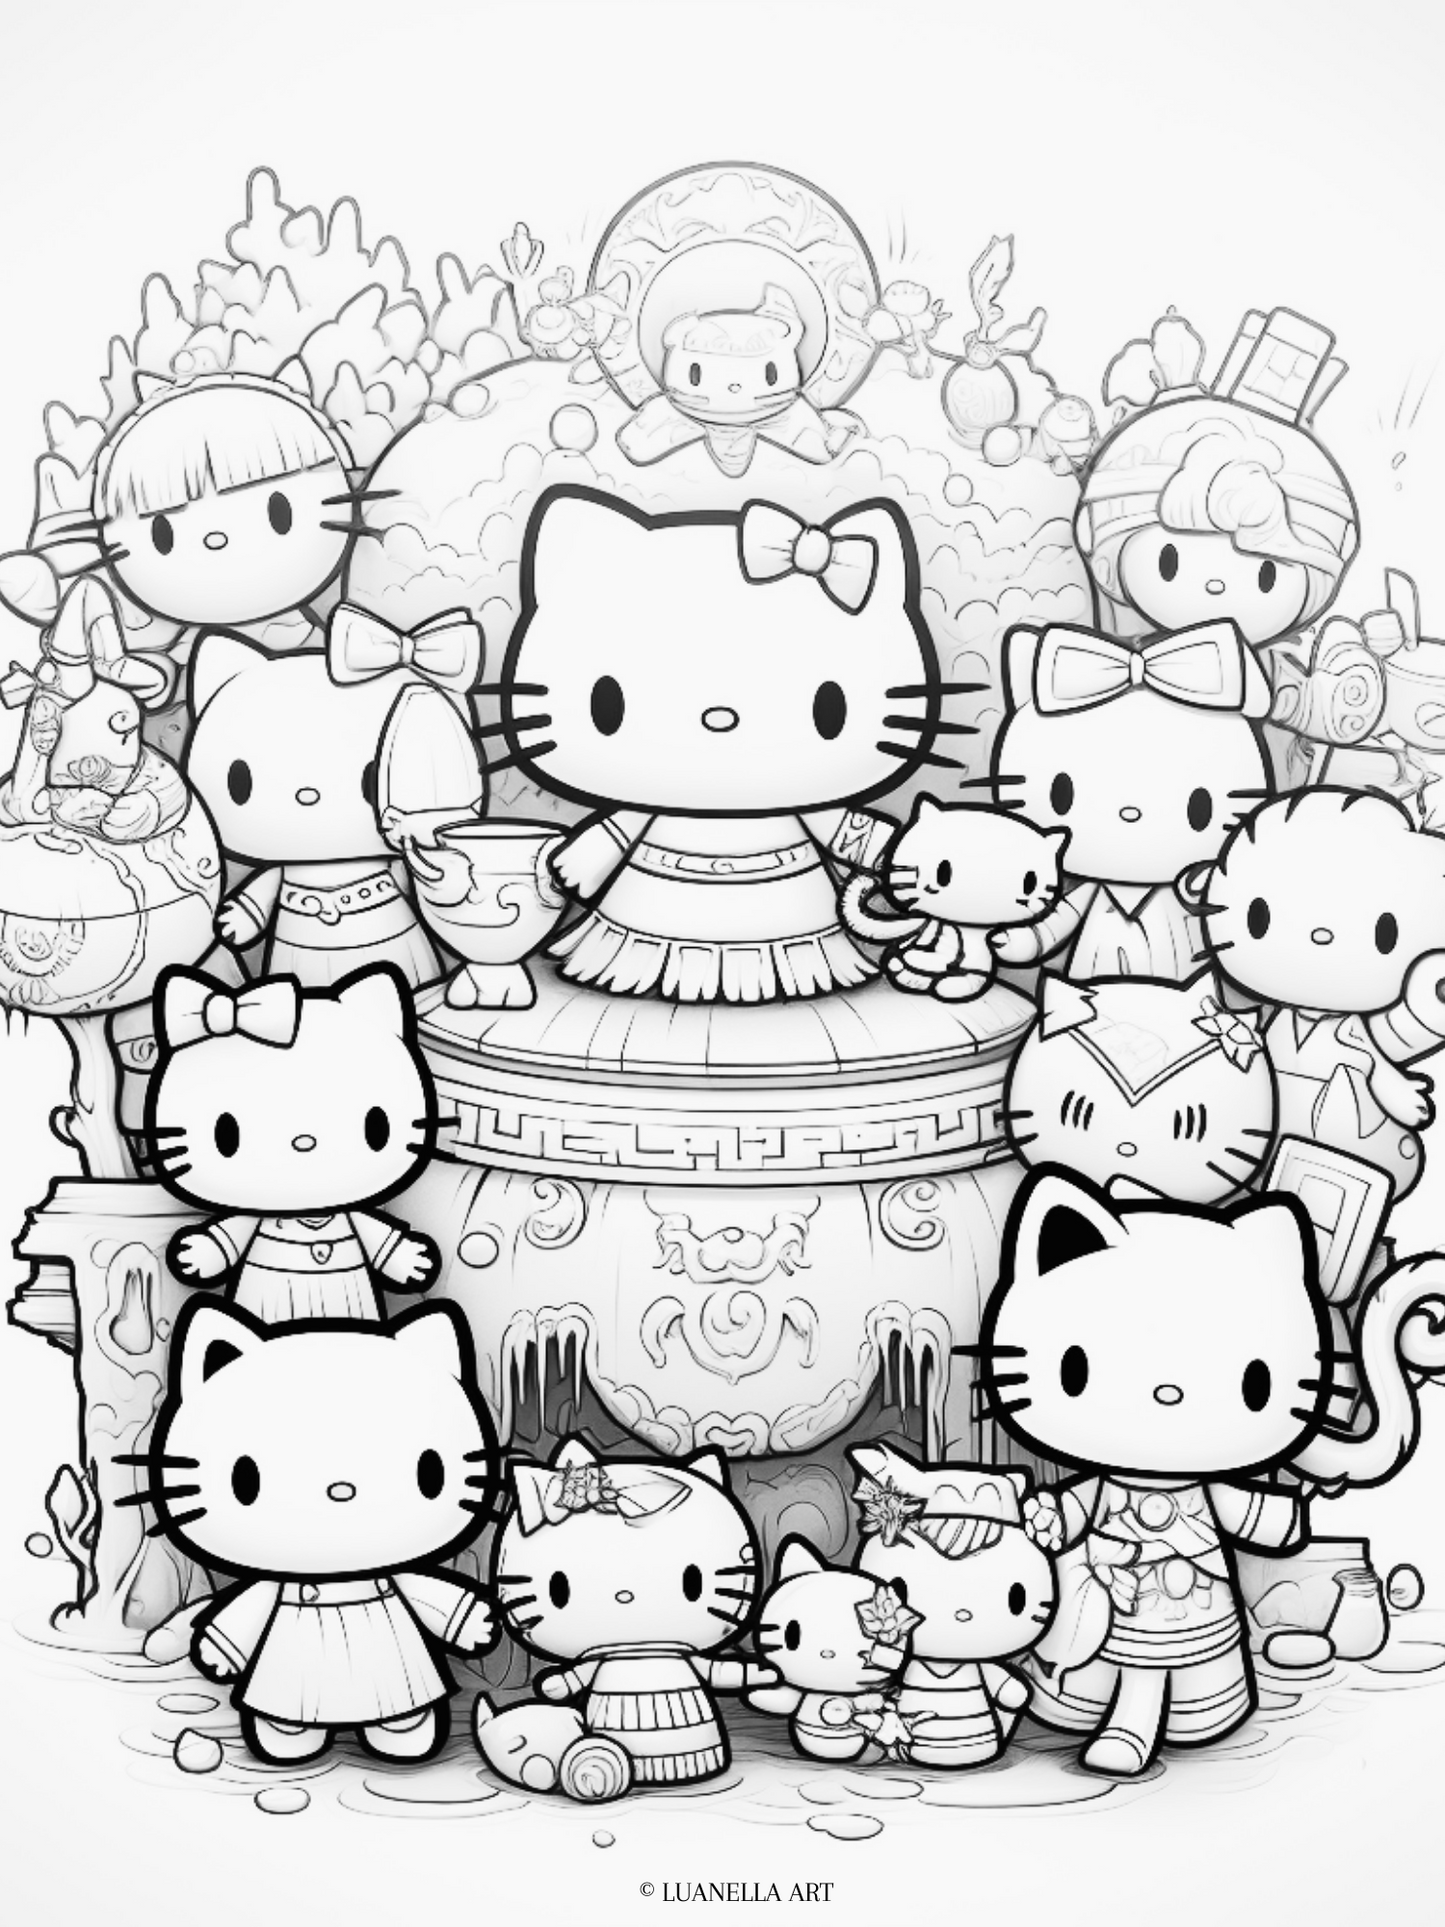 Sanrio and friends | Coloring Page | Instant Digital Download